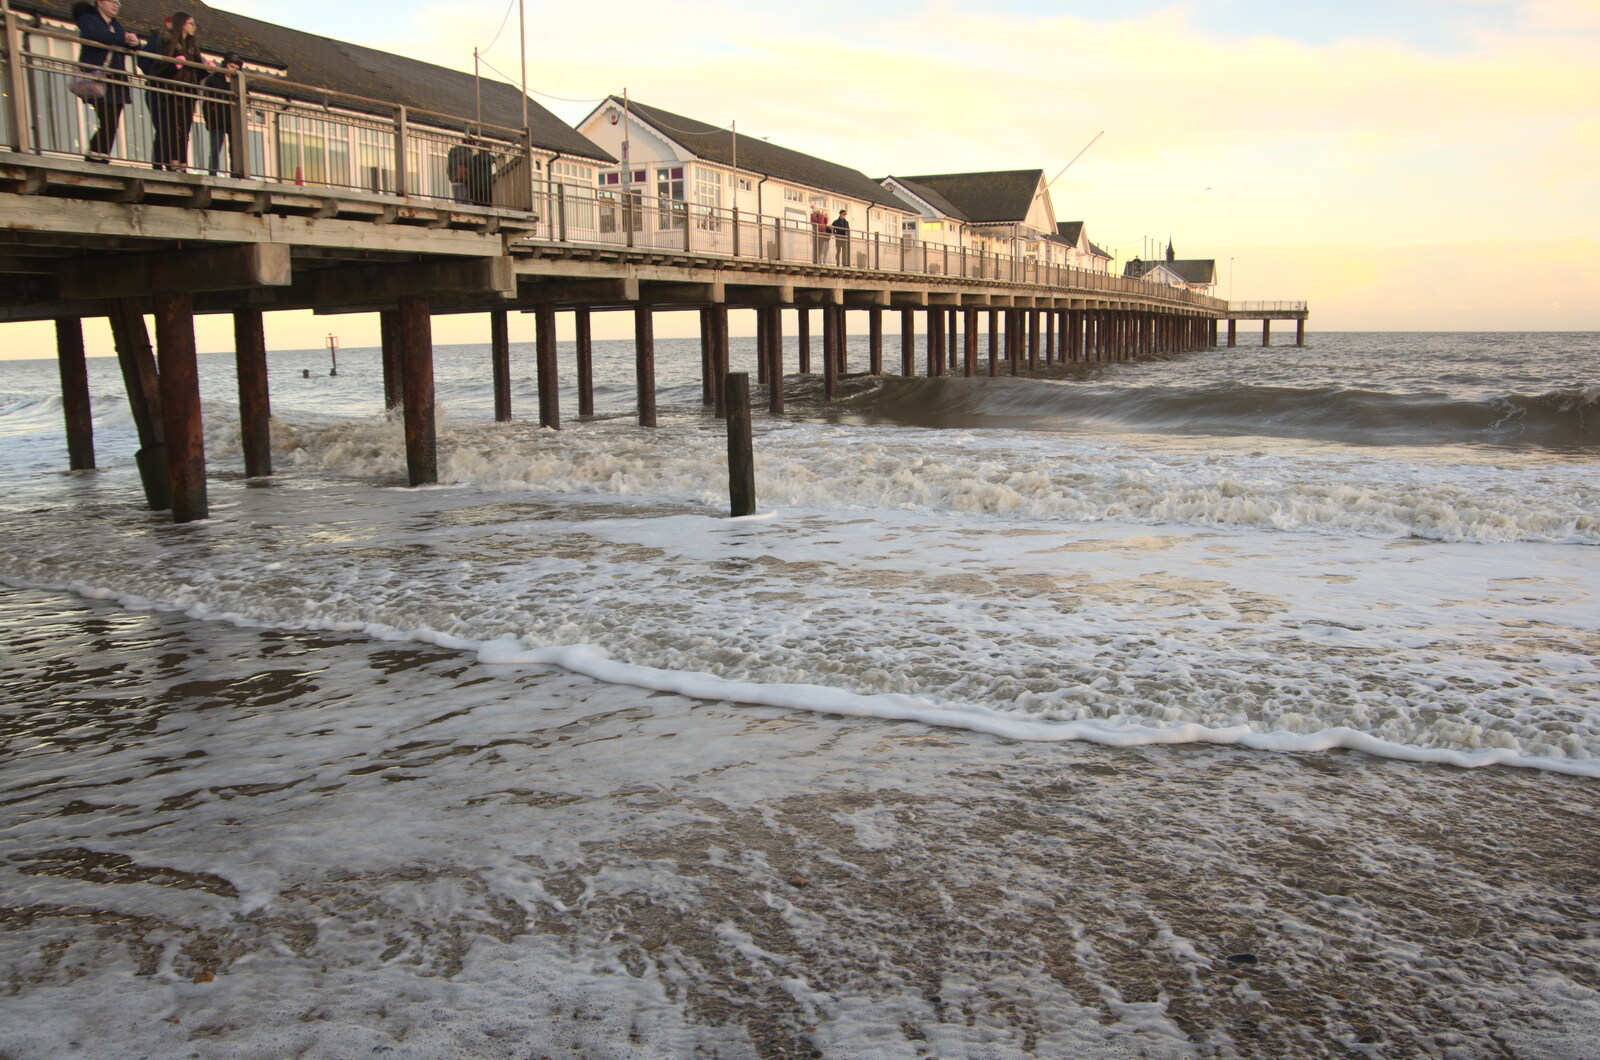 The tide rolls in from A Return to the Beach, Southwold, Suffolk - 20th December 2020